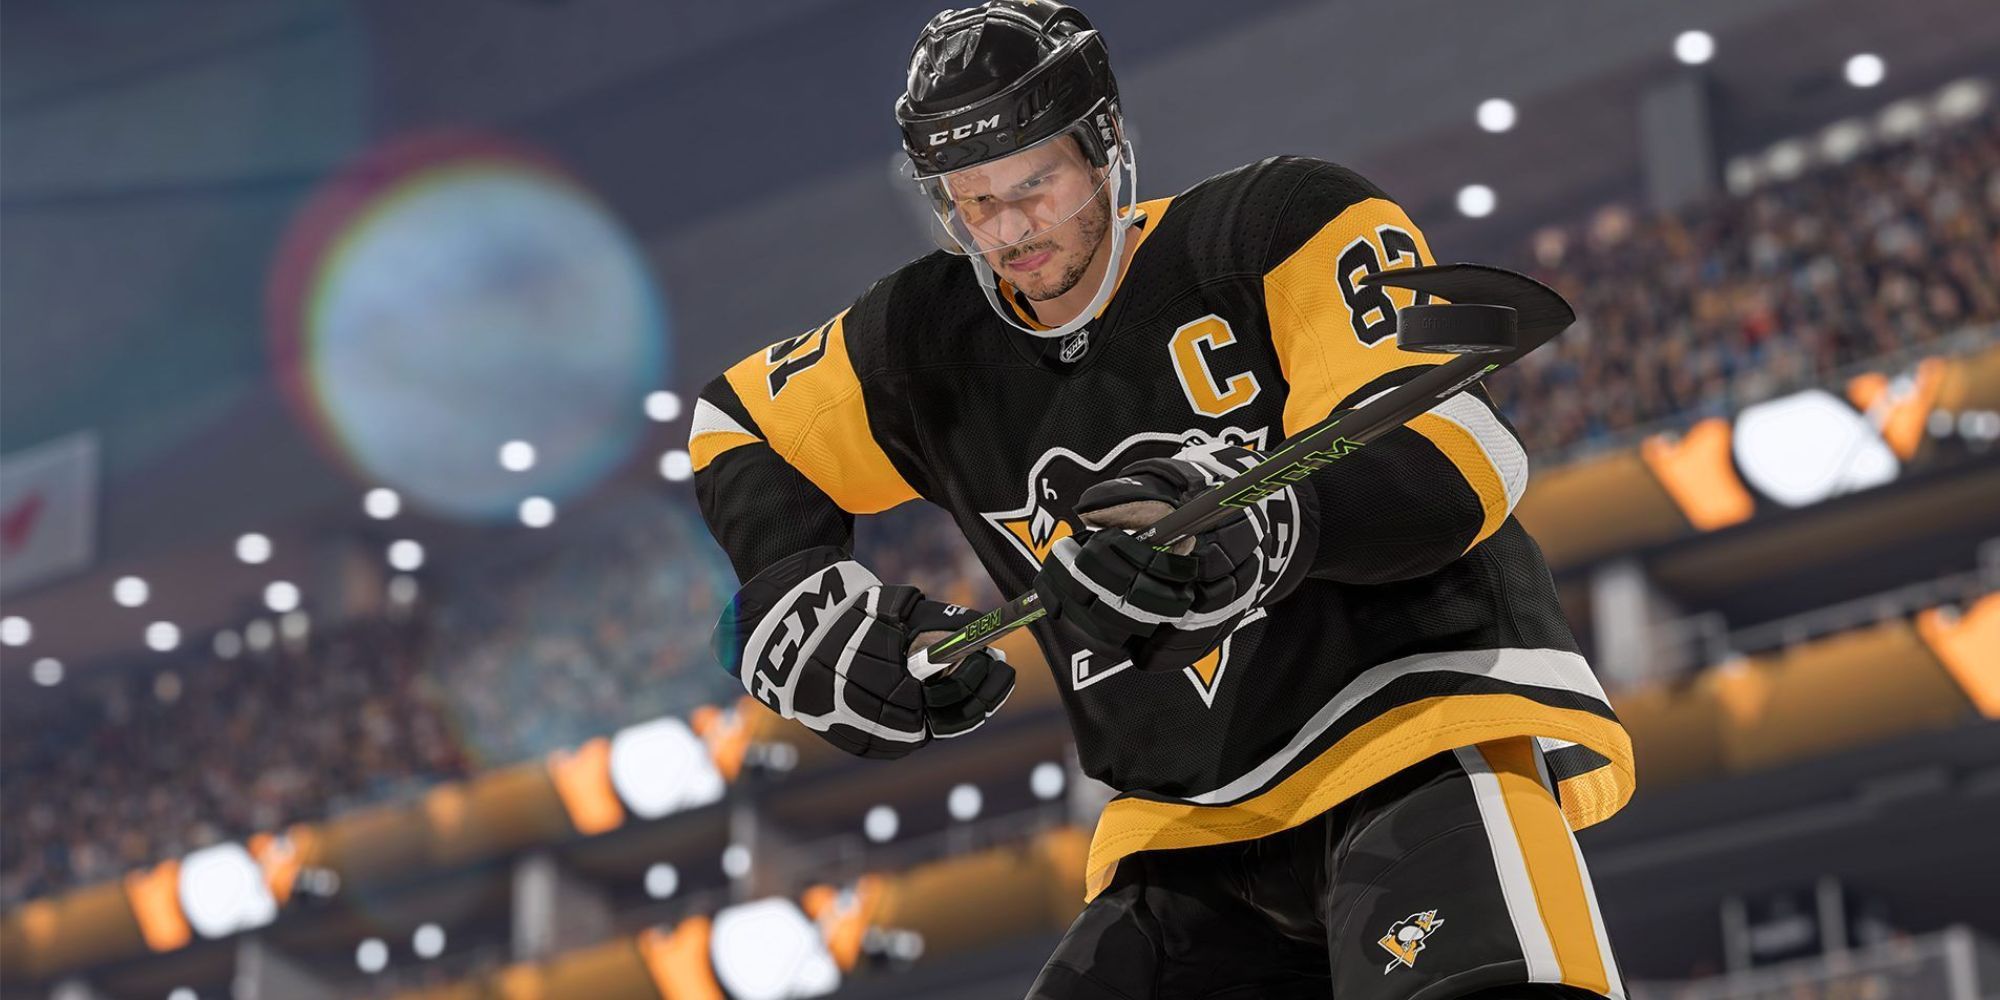 Sidney Crosby NHL 22 official video game screenshot Pittsburgh Penguins hockey